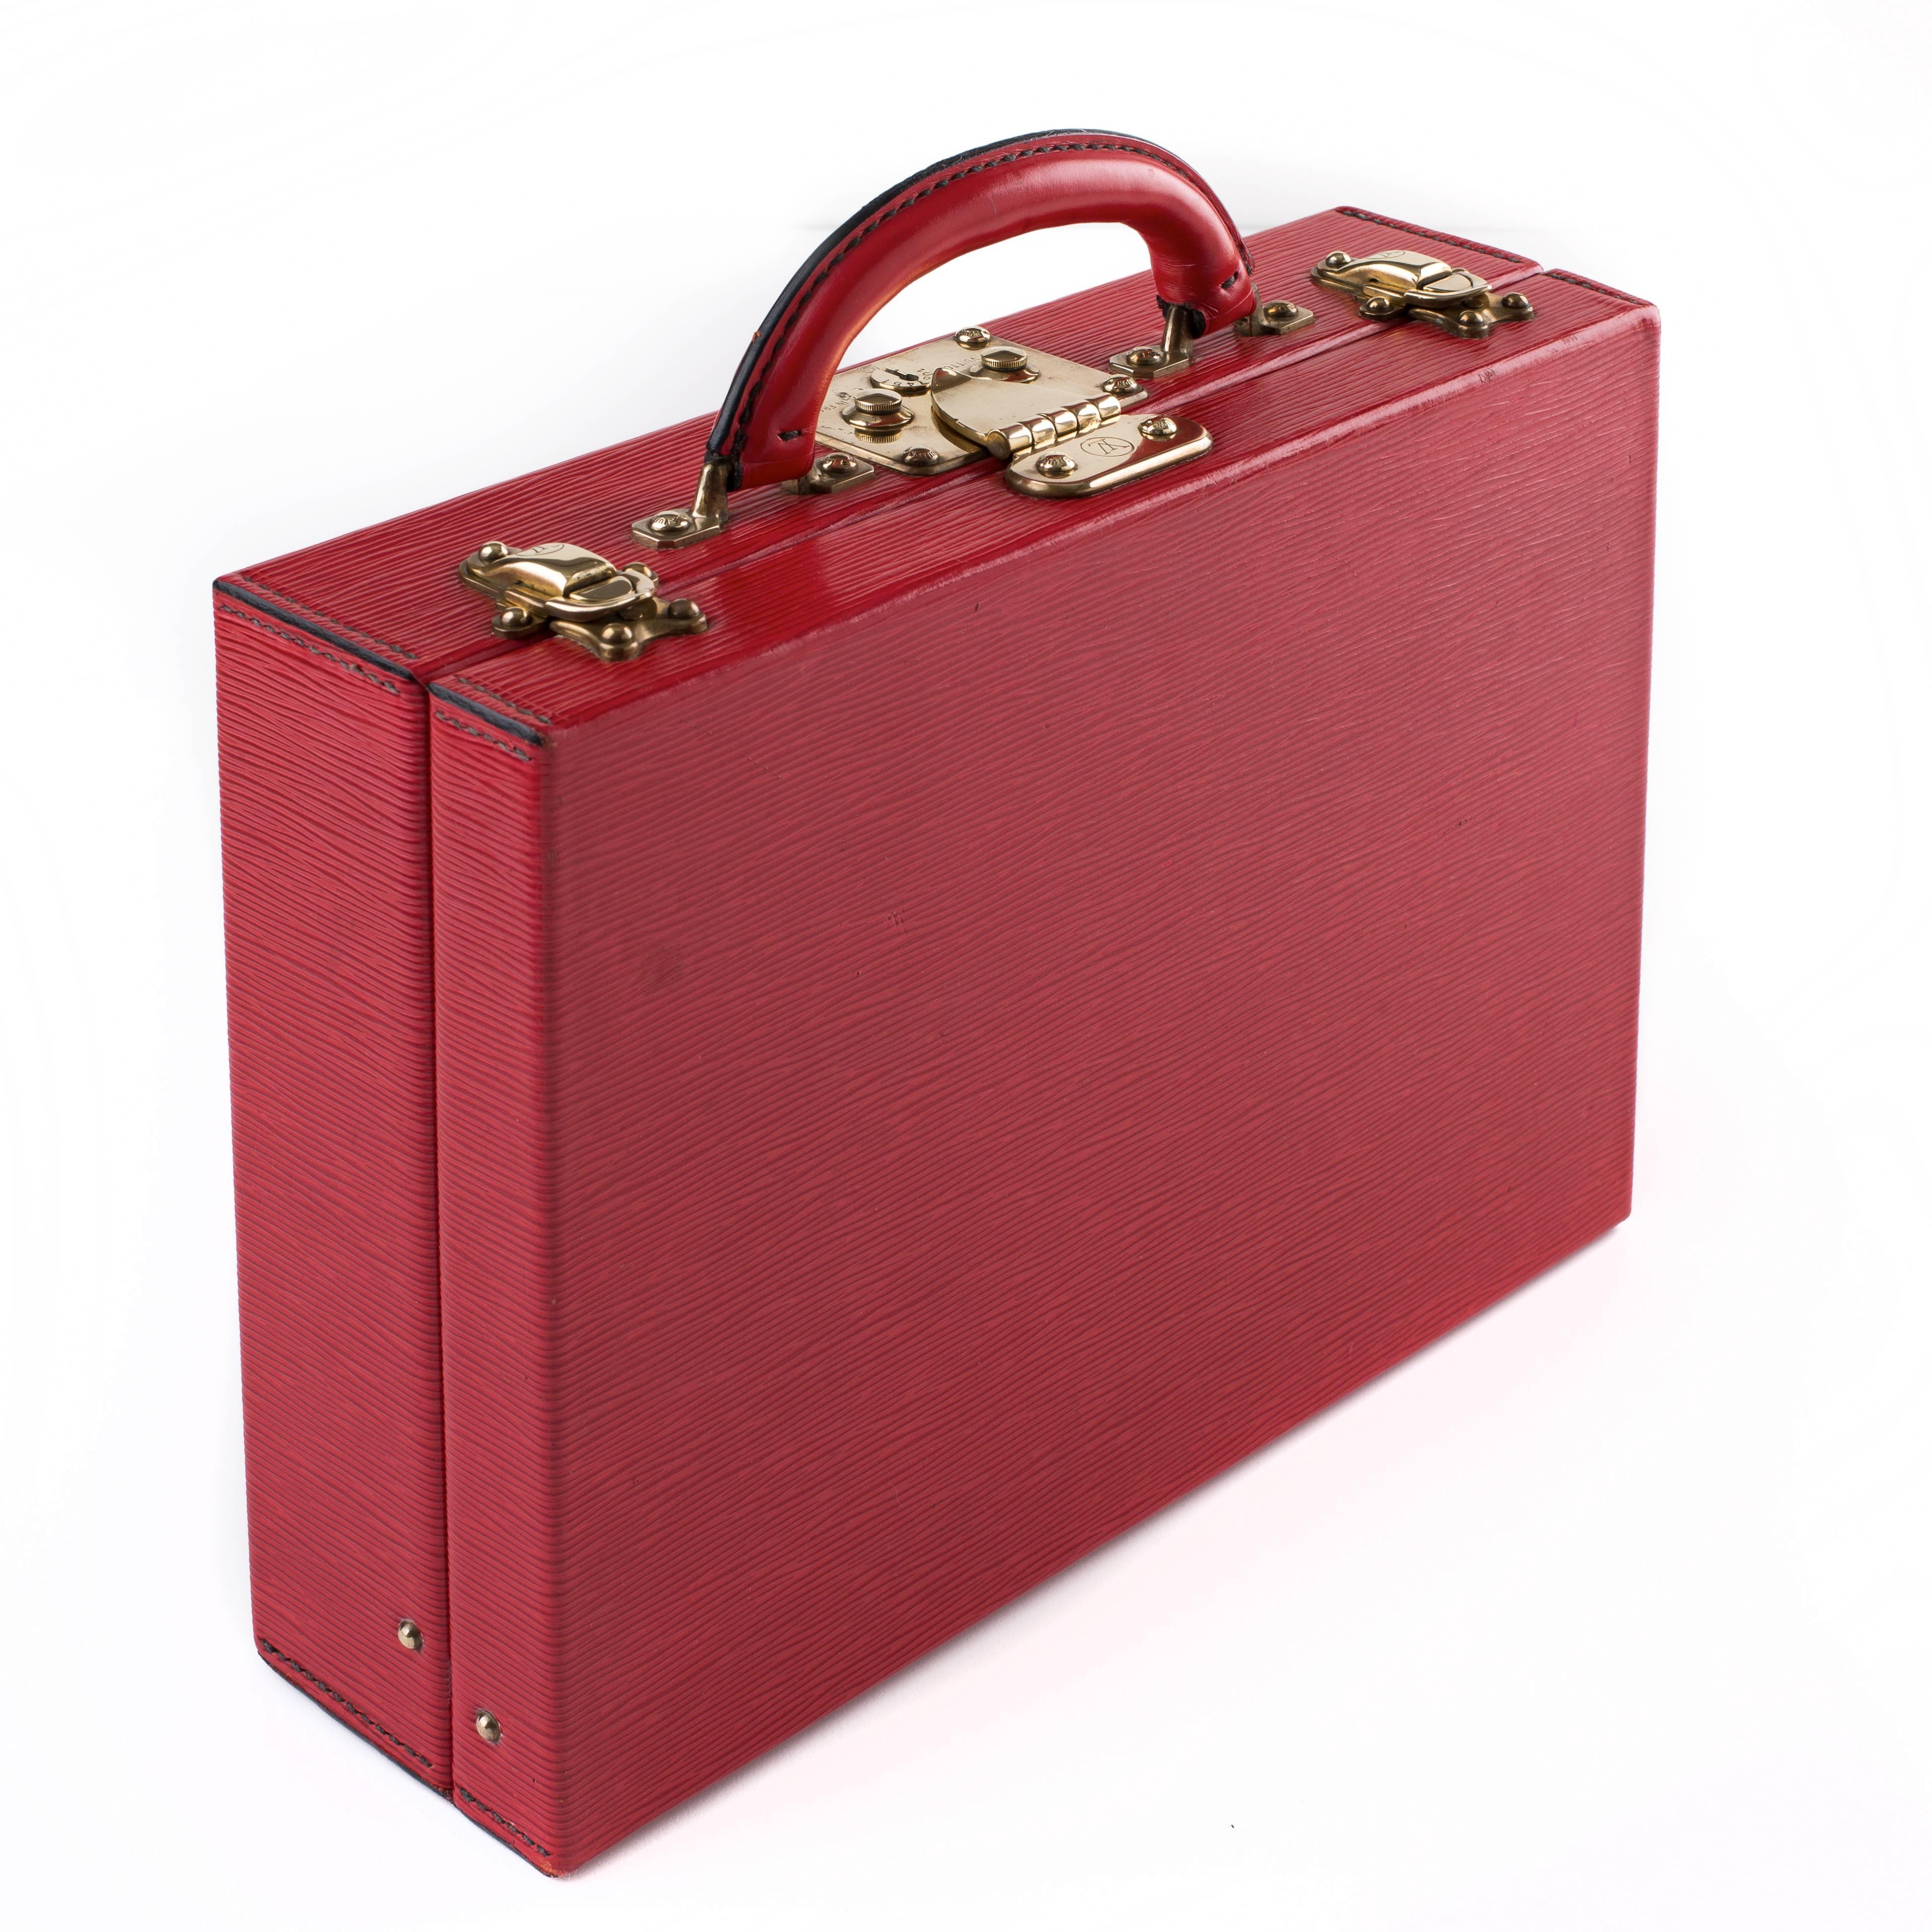 Louis Vuitton Red Epi Leather Jewelry Case In Good Condition For Sale In Double Bay, NSW